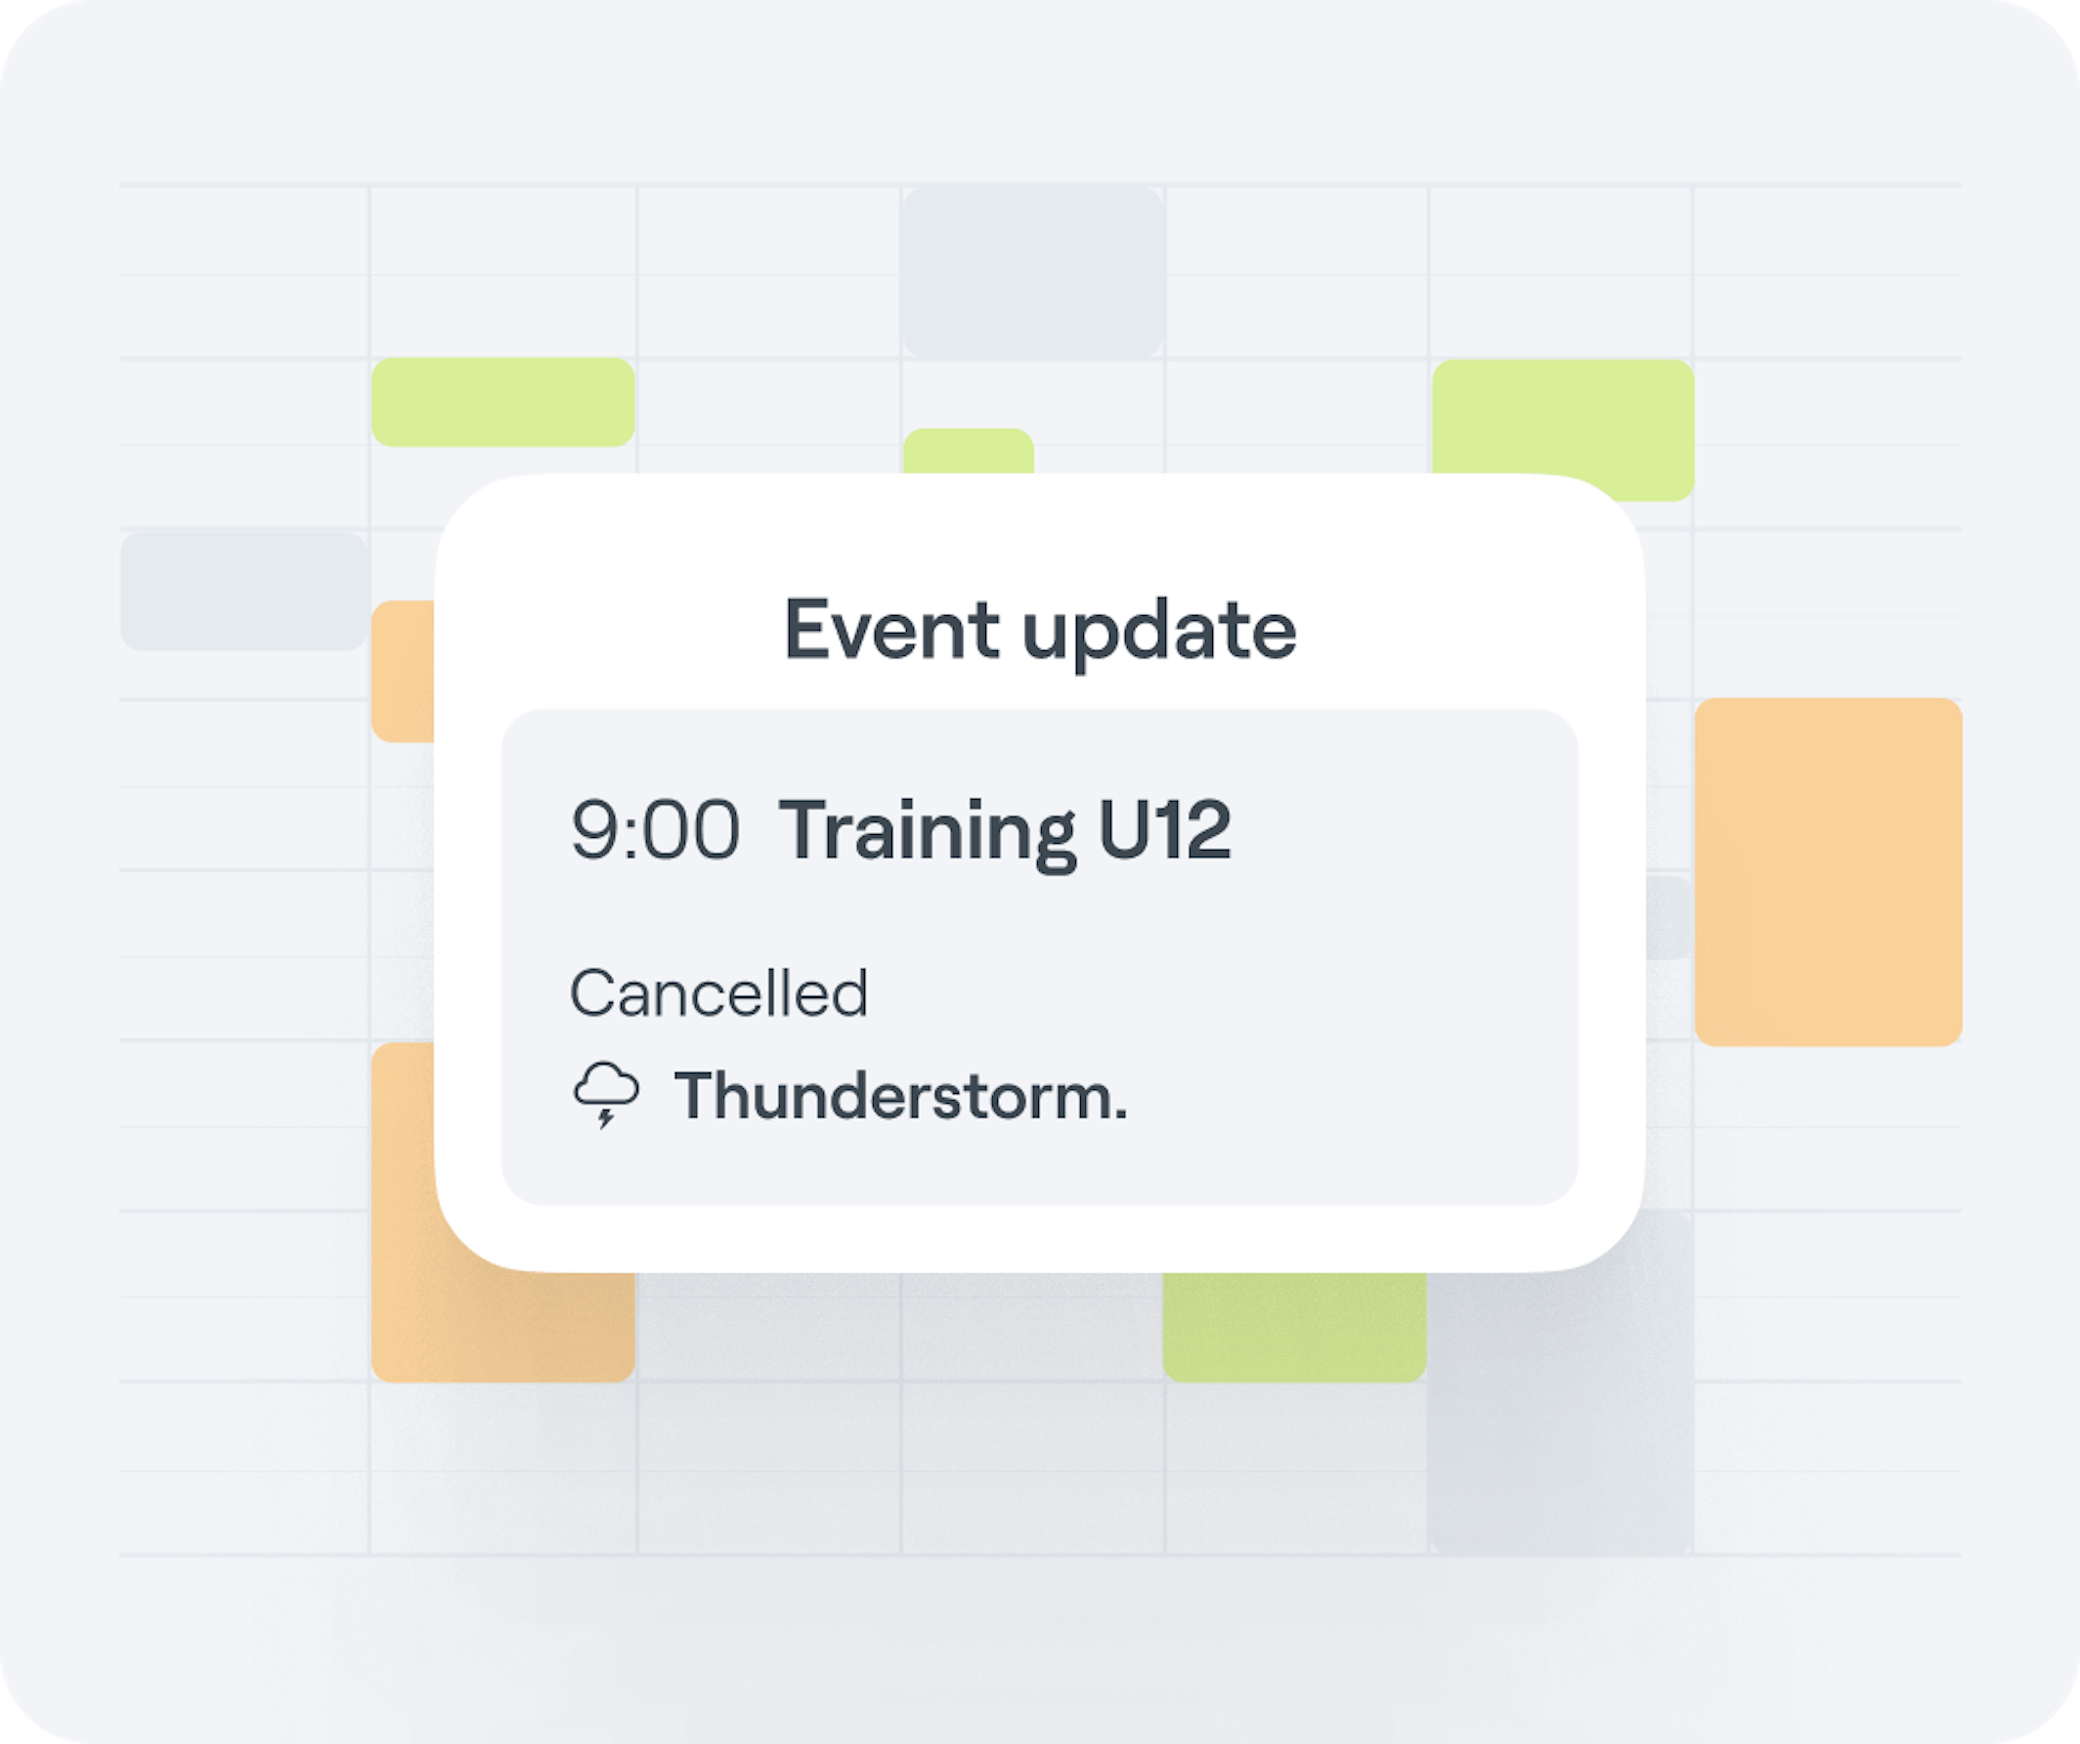 Interface graphic showing an Abler event update for a scheduled training that is cancelled due to a thunderstorm